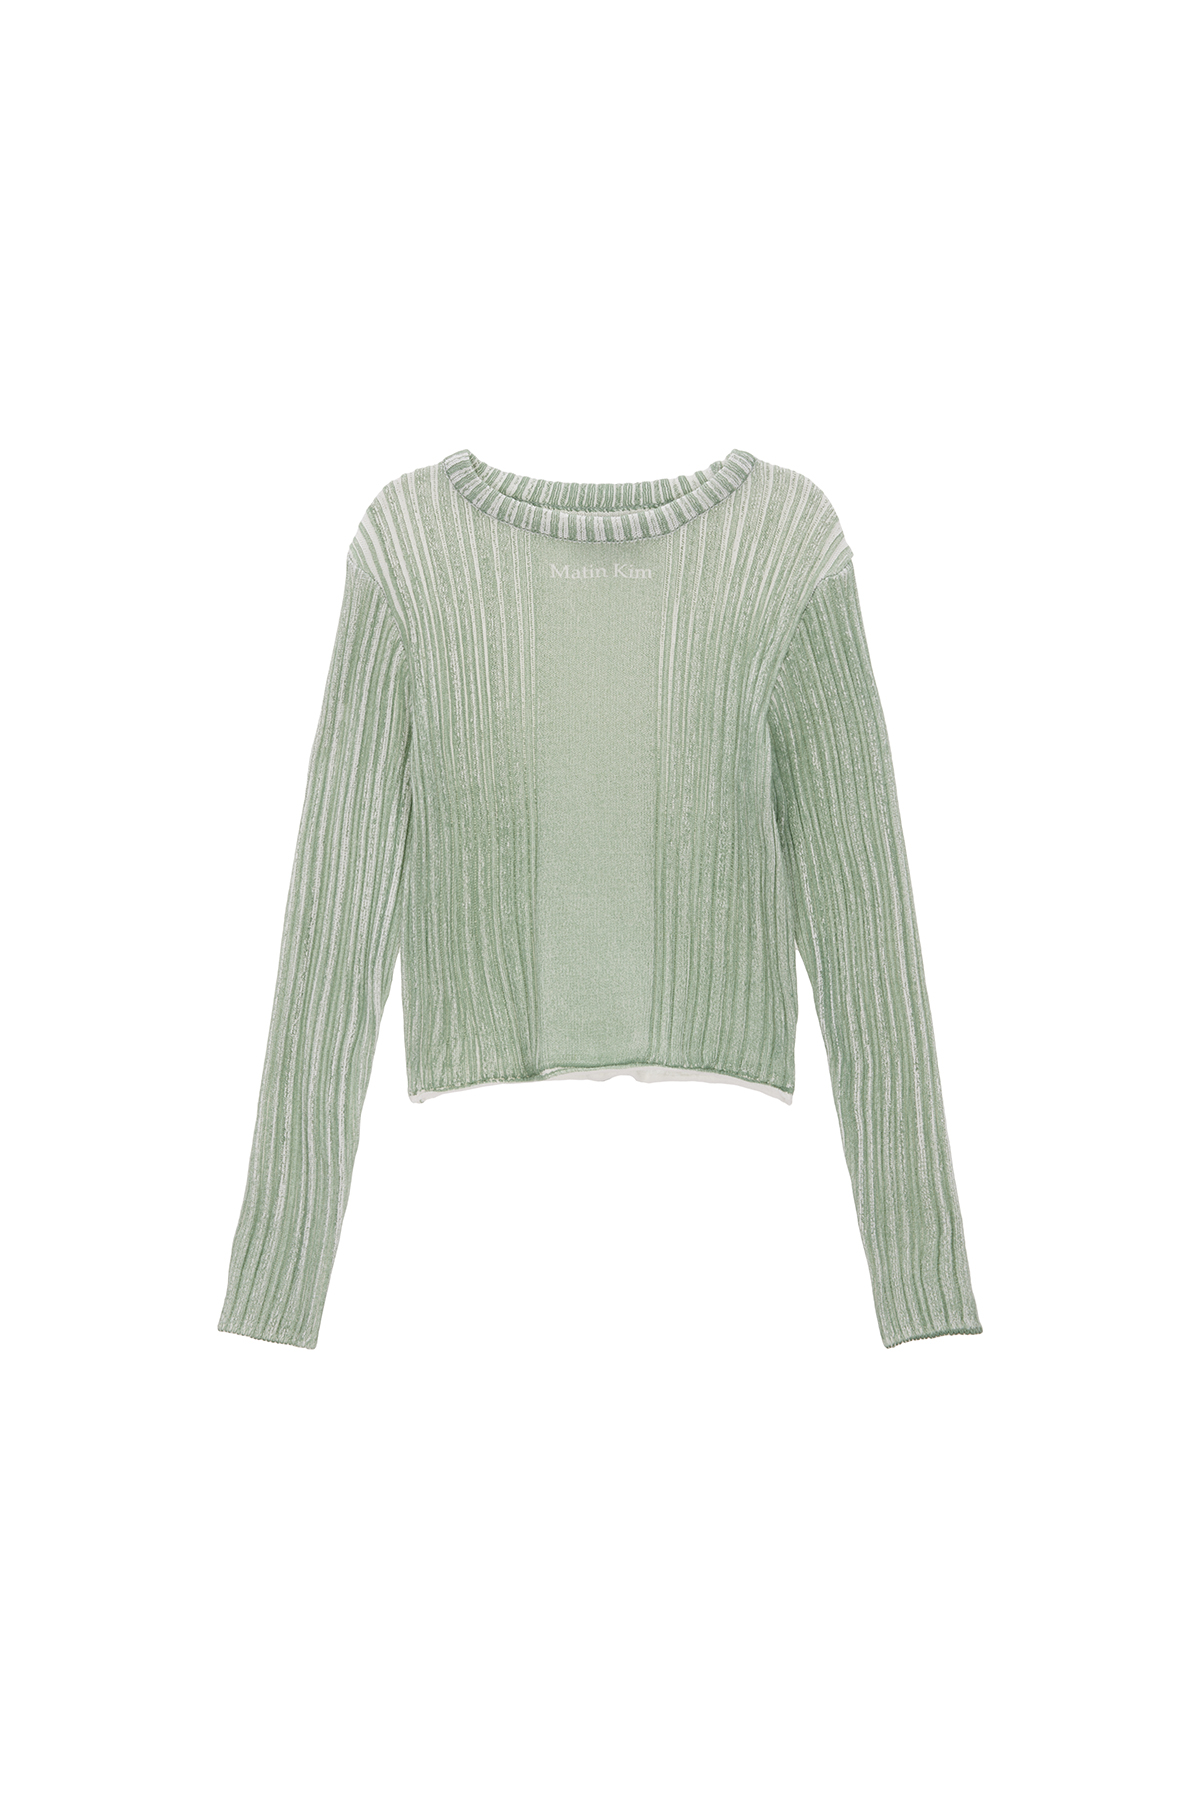 STRIPE PRINTED CROP KNIT PULLOVER IN MINT